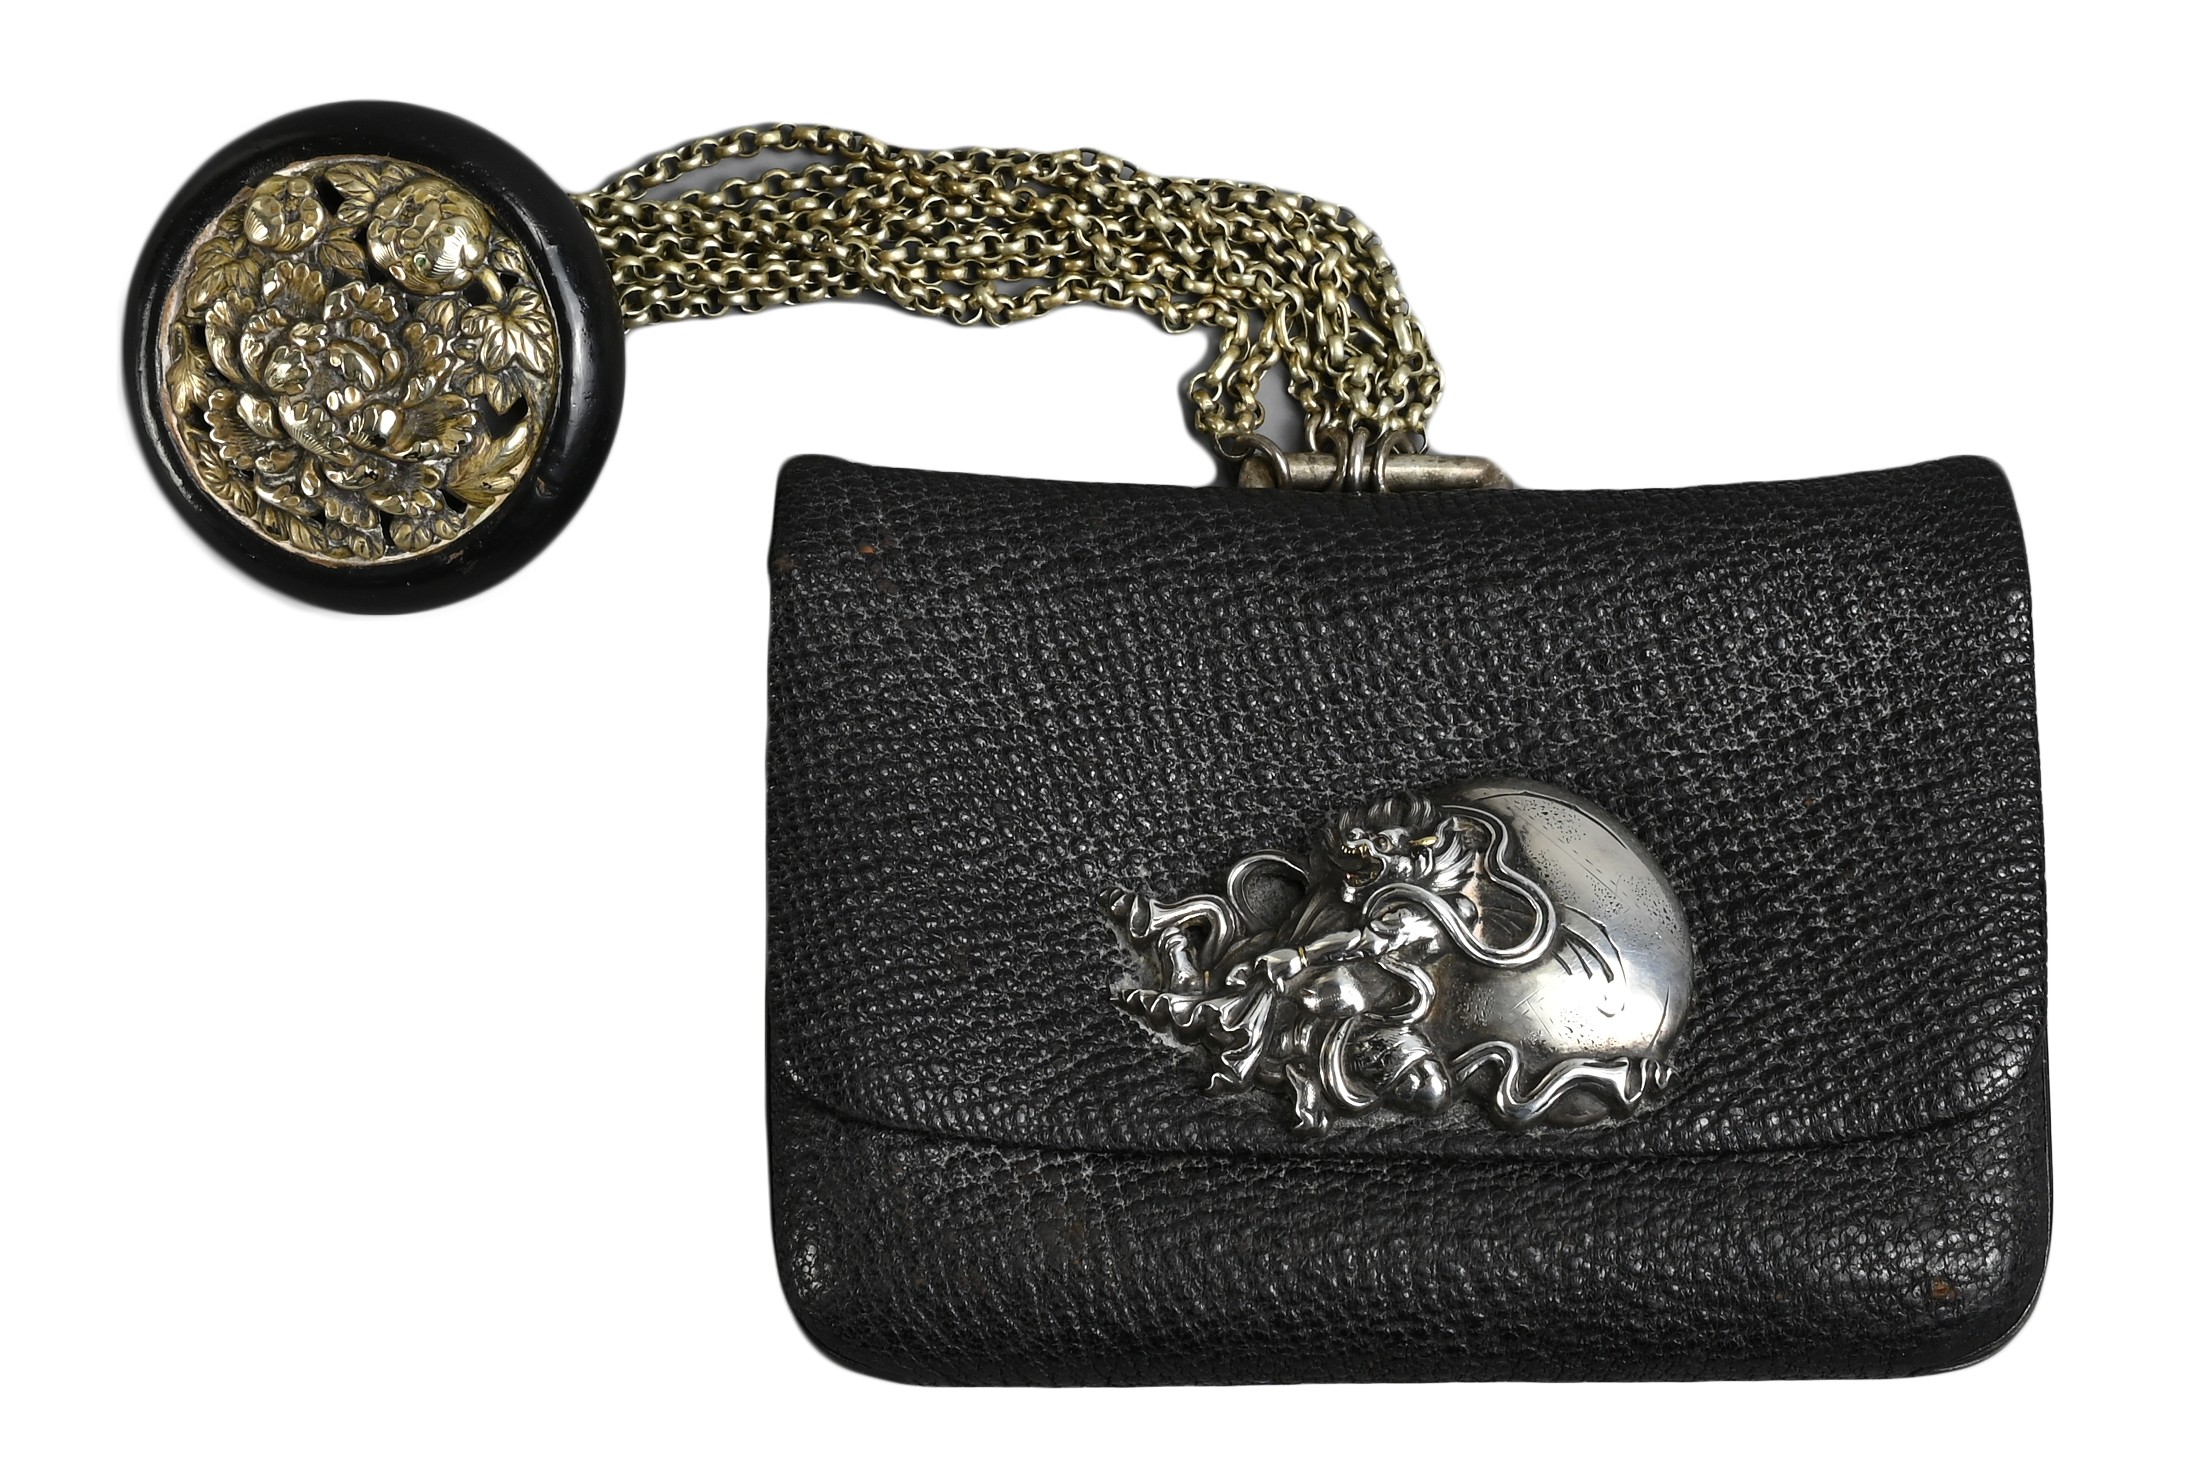 A JAPANESE MEIJI PERIOD (1868-1912) BLACK LEATHER COIN POUCH (FUKURO) WITH SILVER-COLOURED METAL